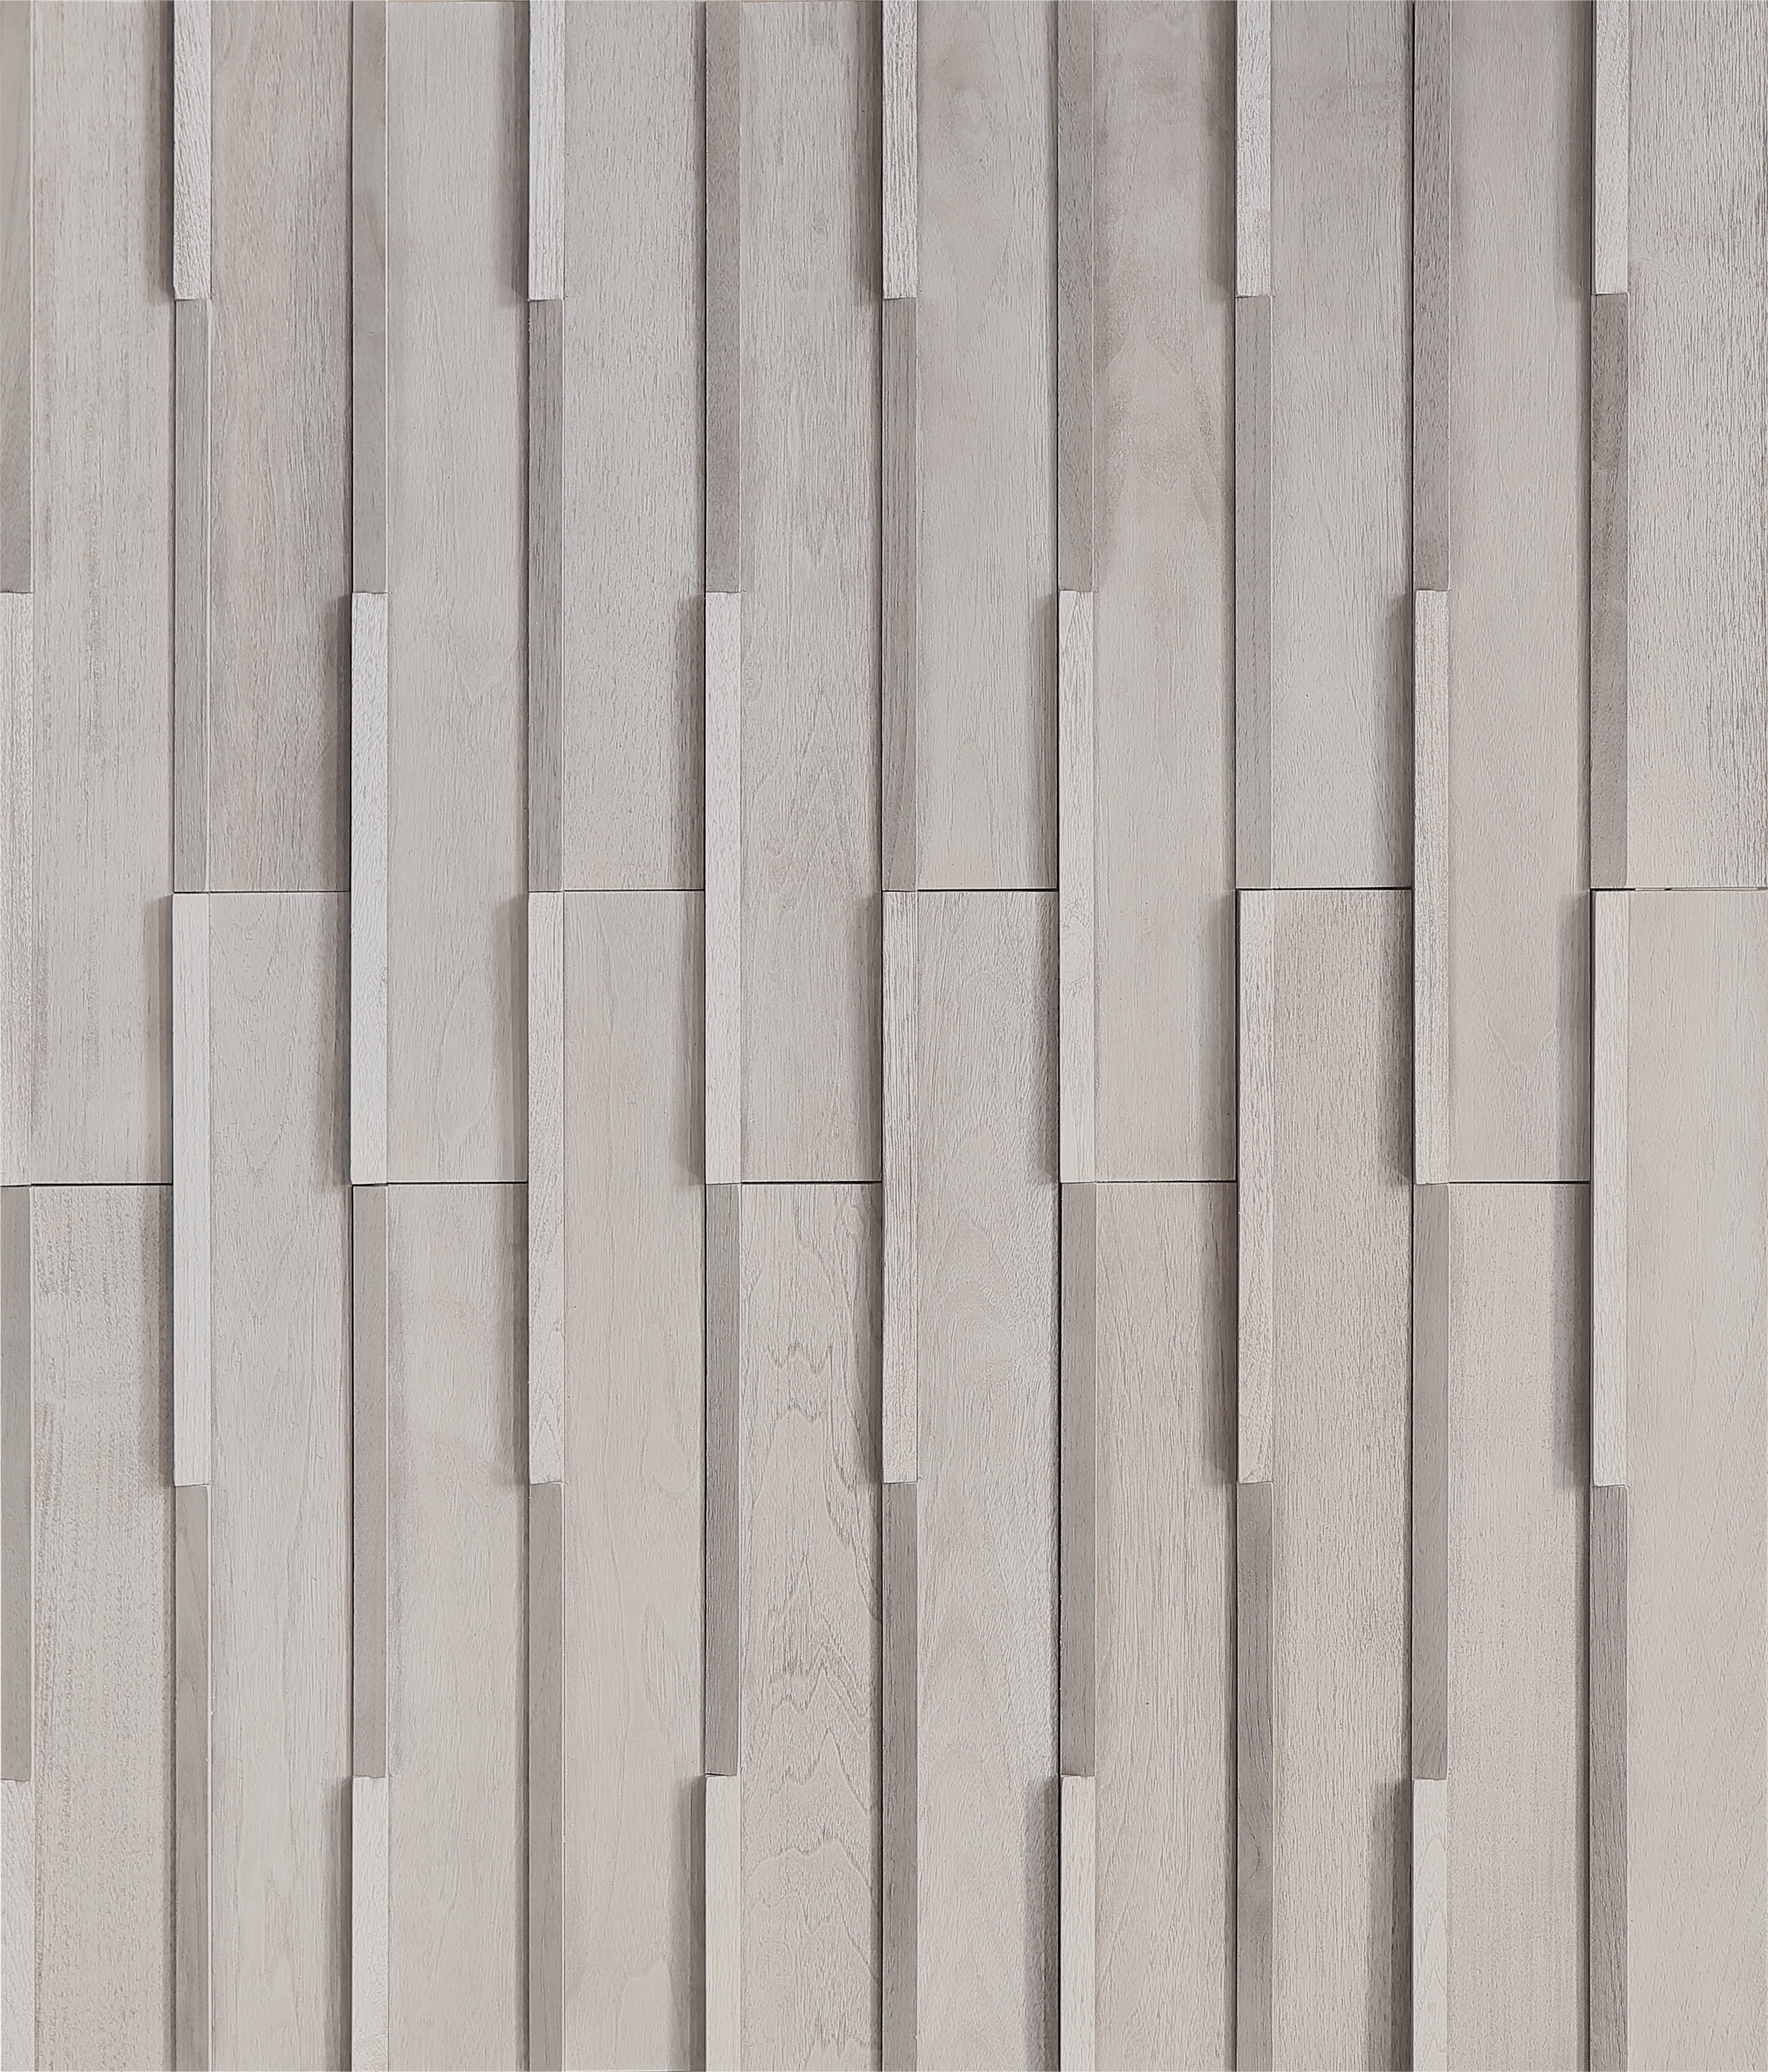 duchateau inceptiv edge iceberg oak three dimensional wall natural wood panel lacquer for interior use distributed by surface group international